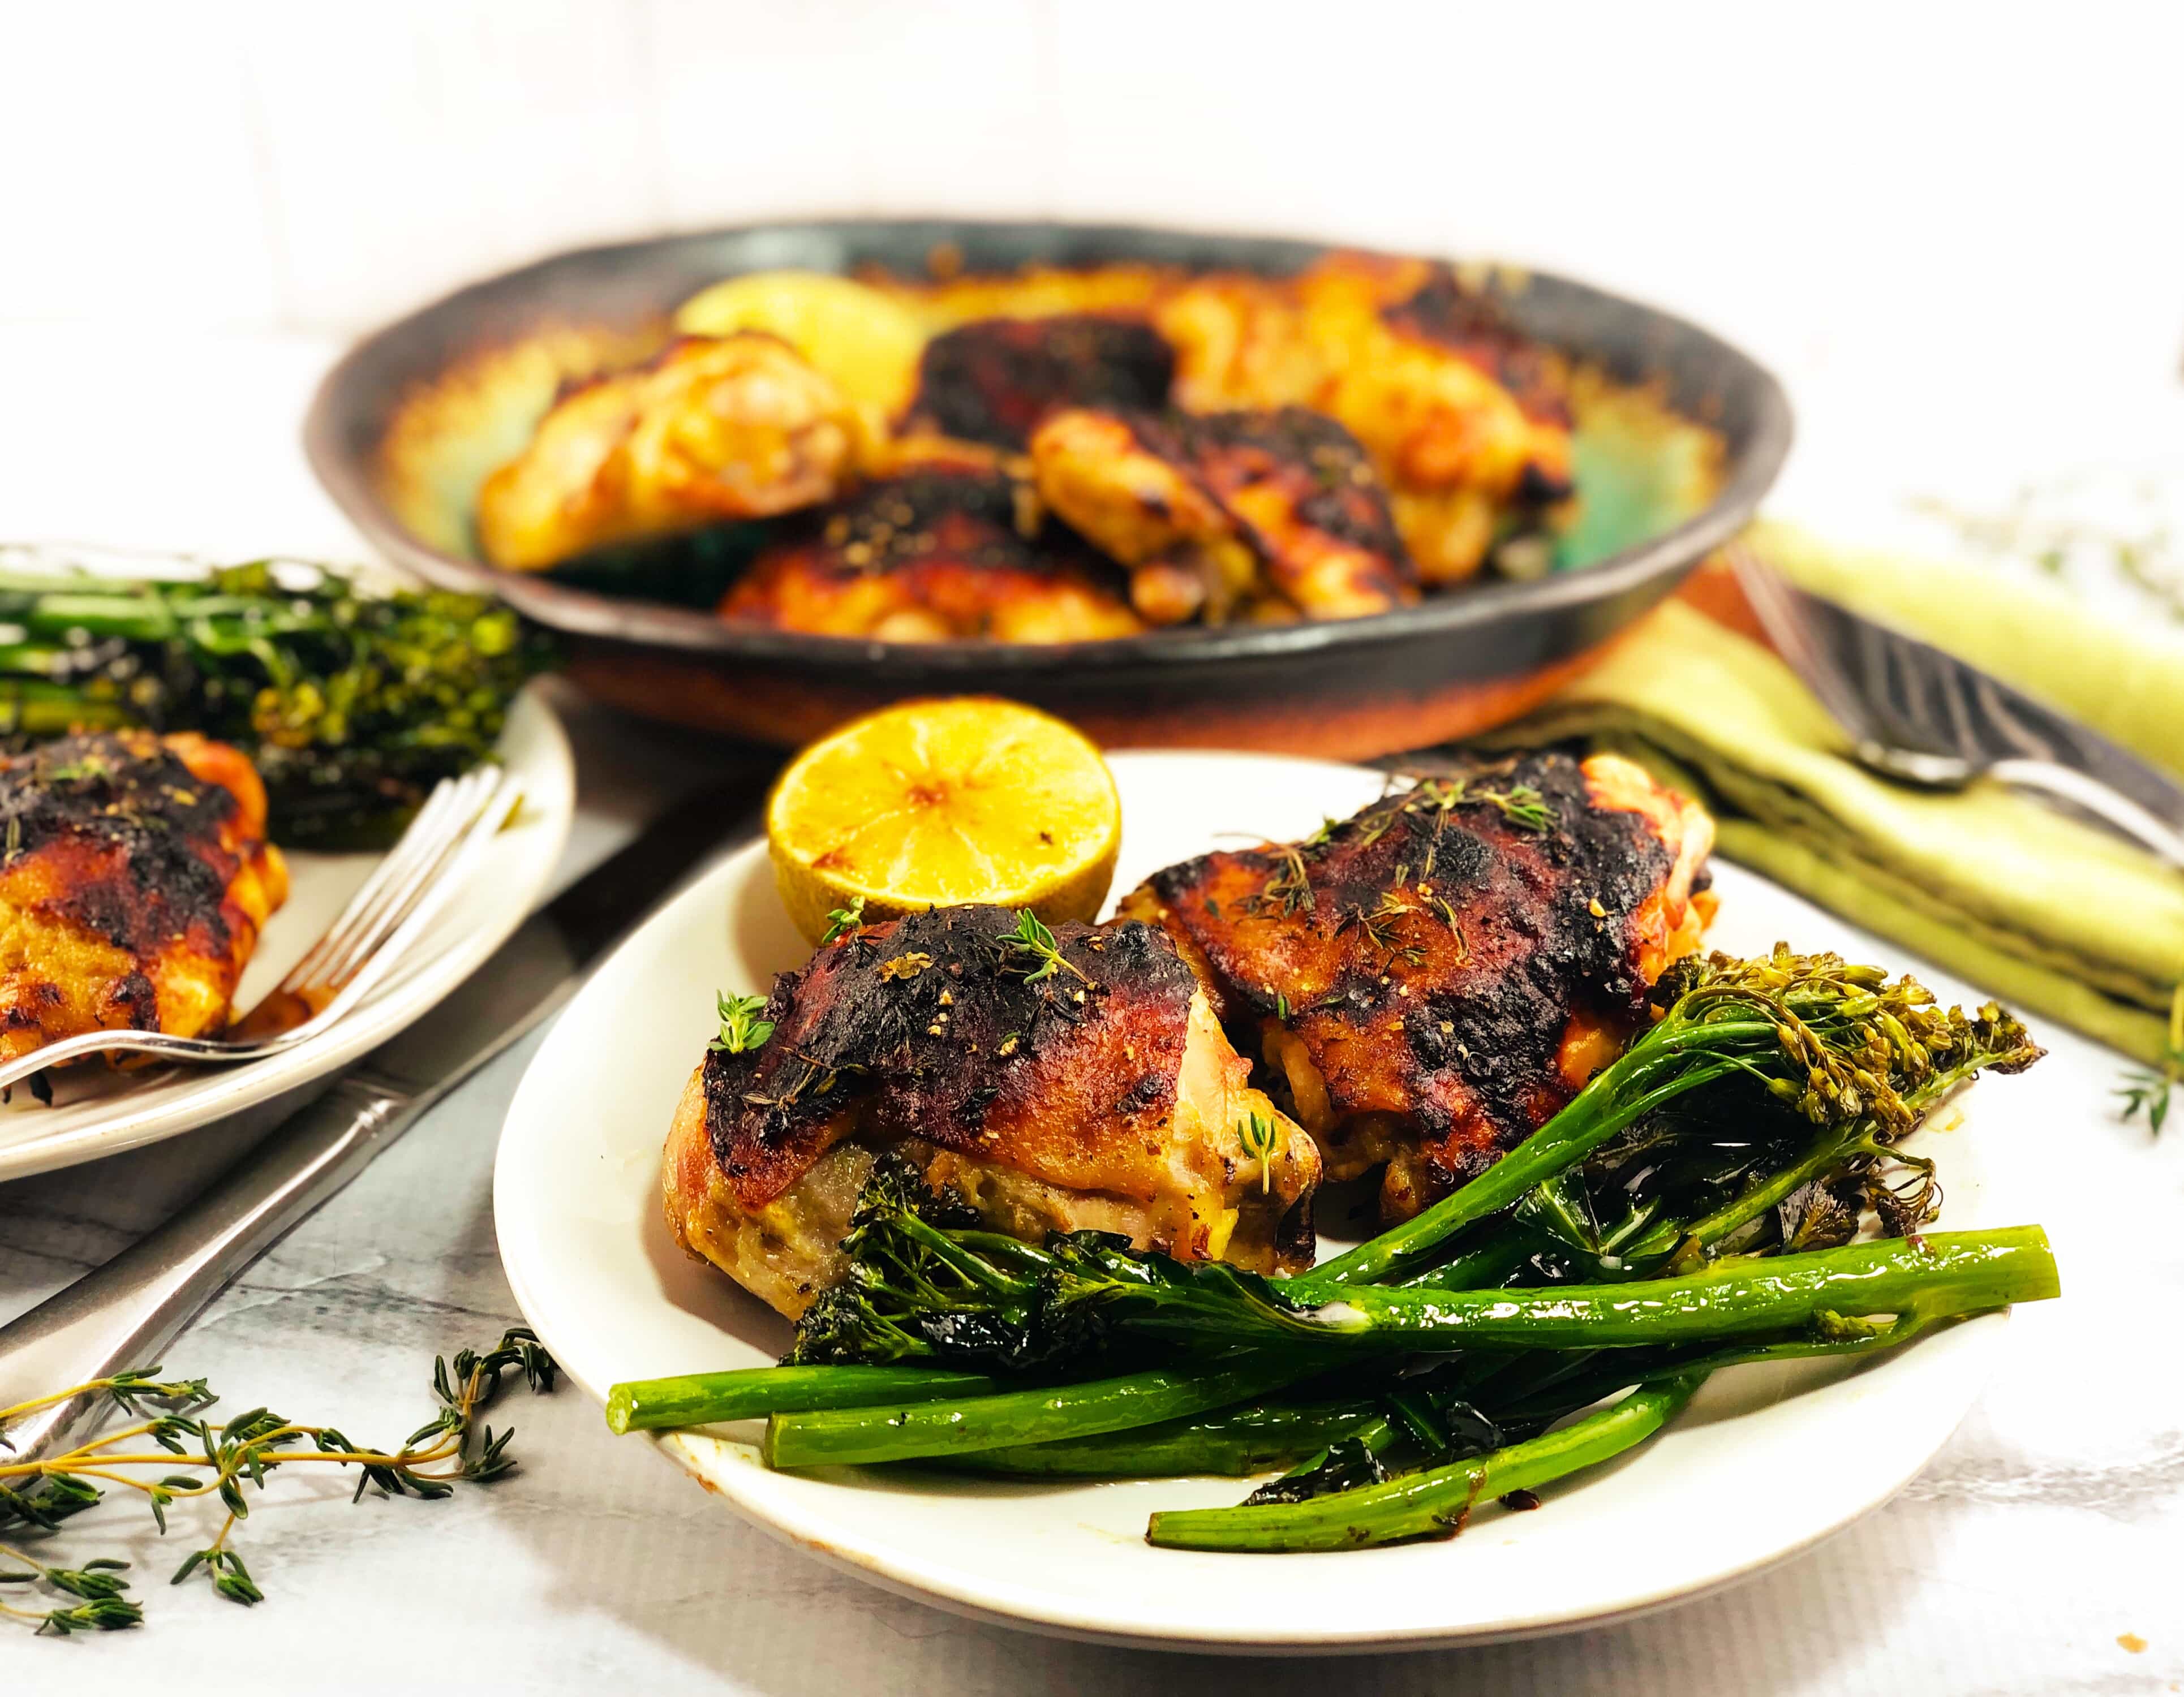 Rhubarb Chicken with Broccolini and Lime Wedge